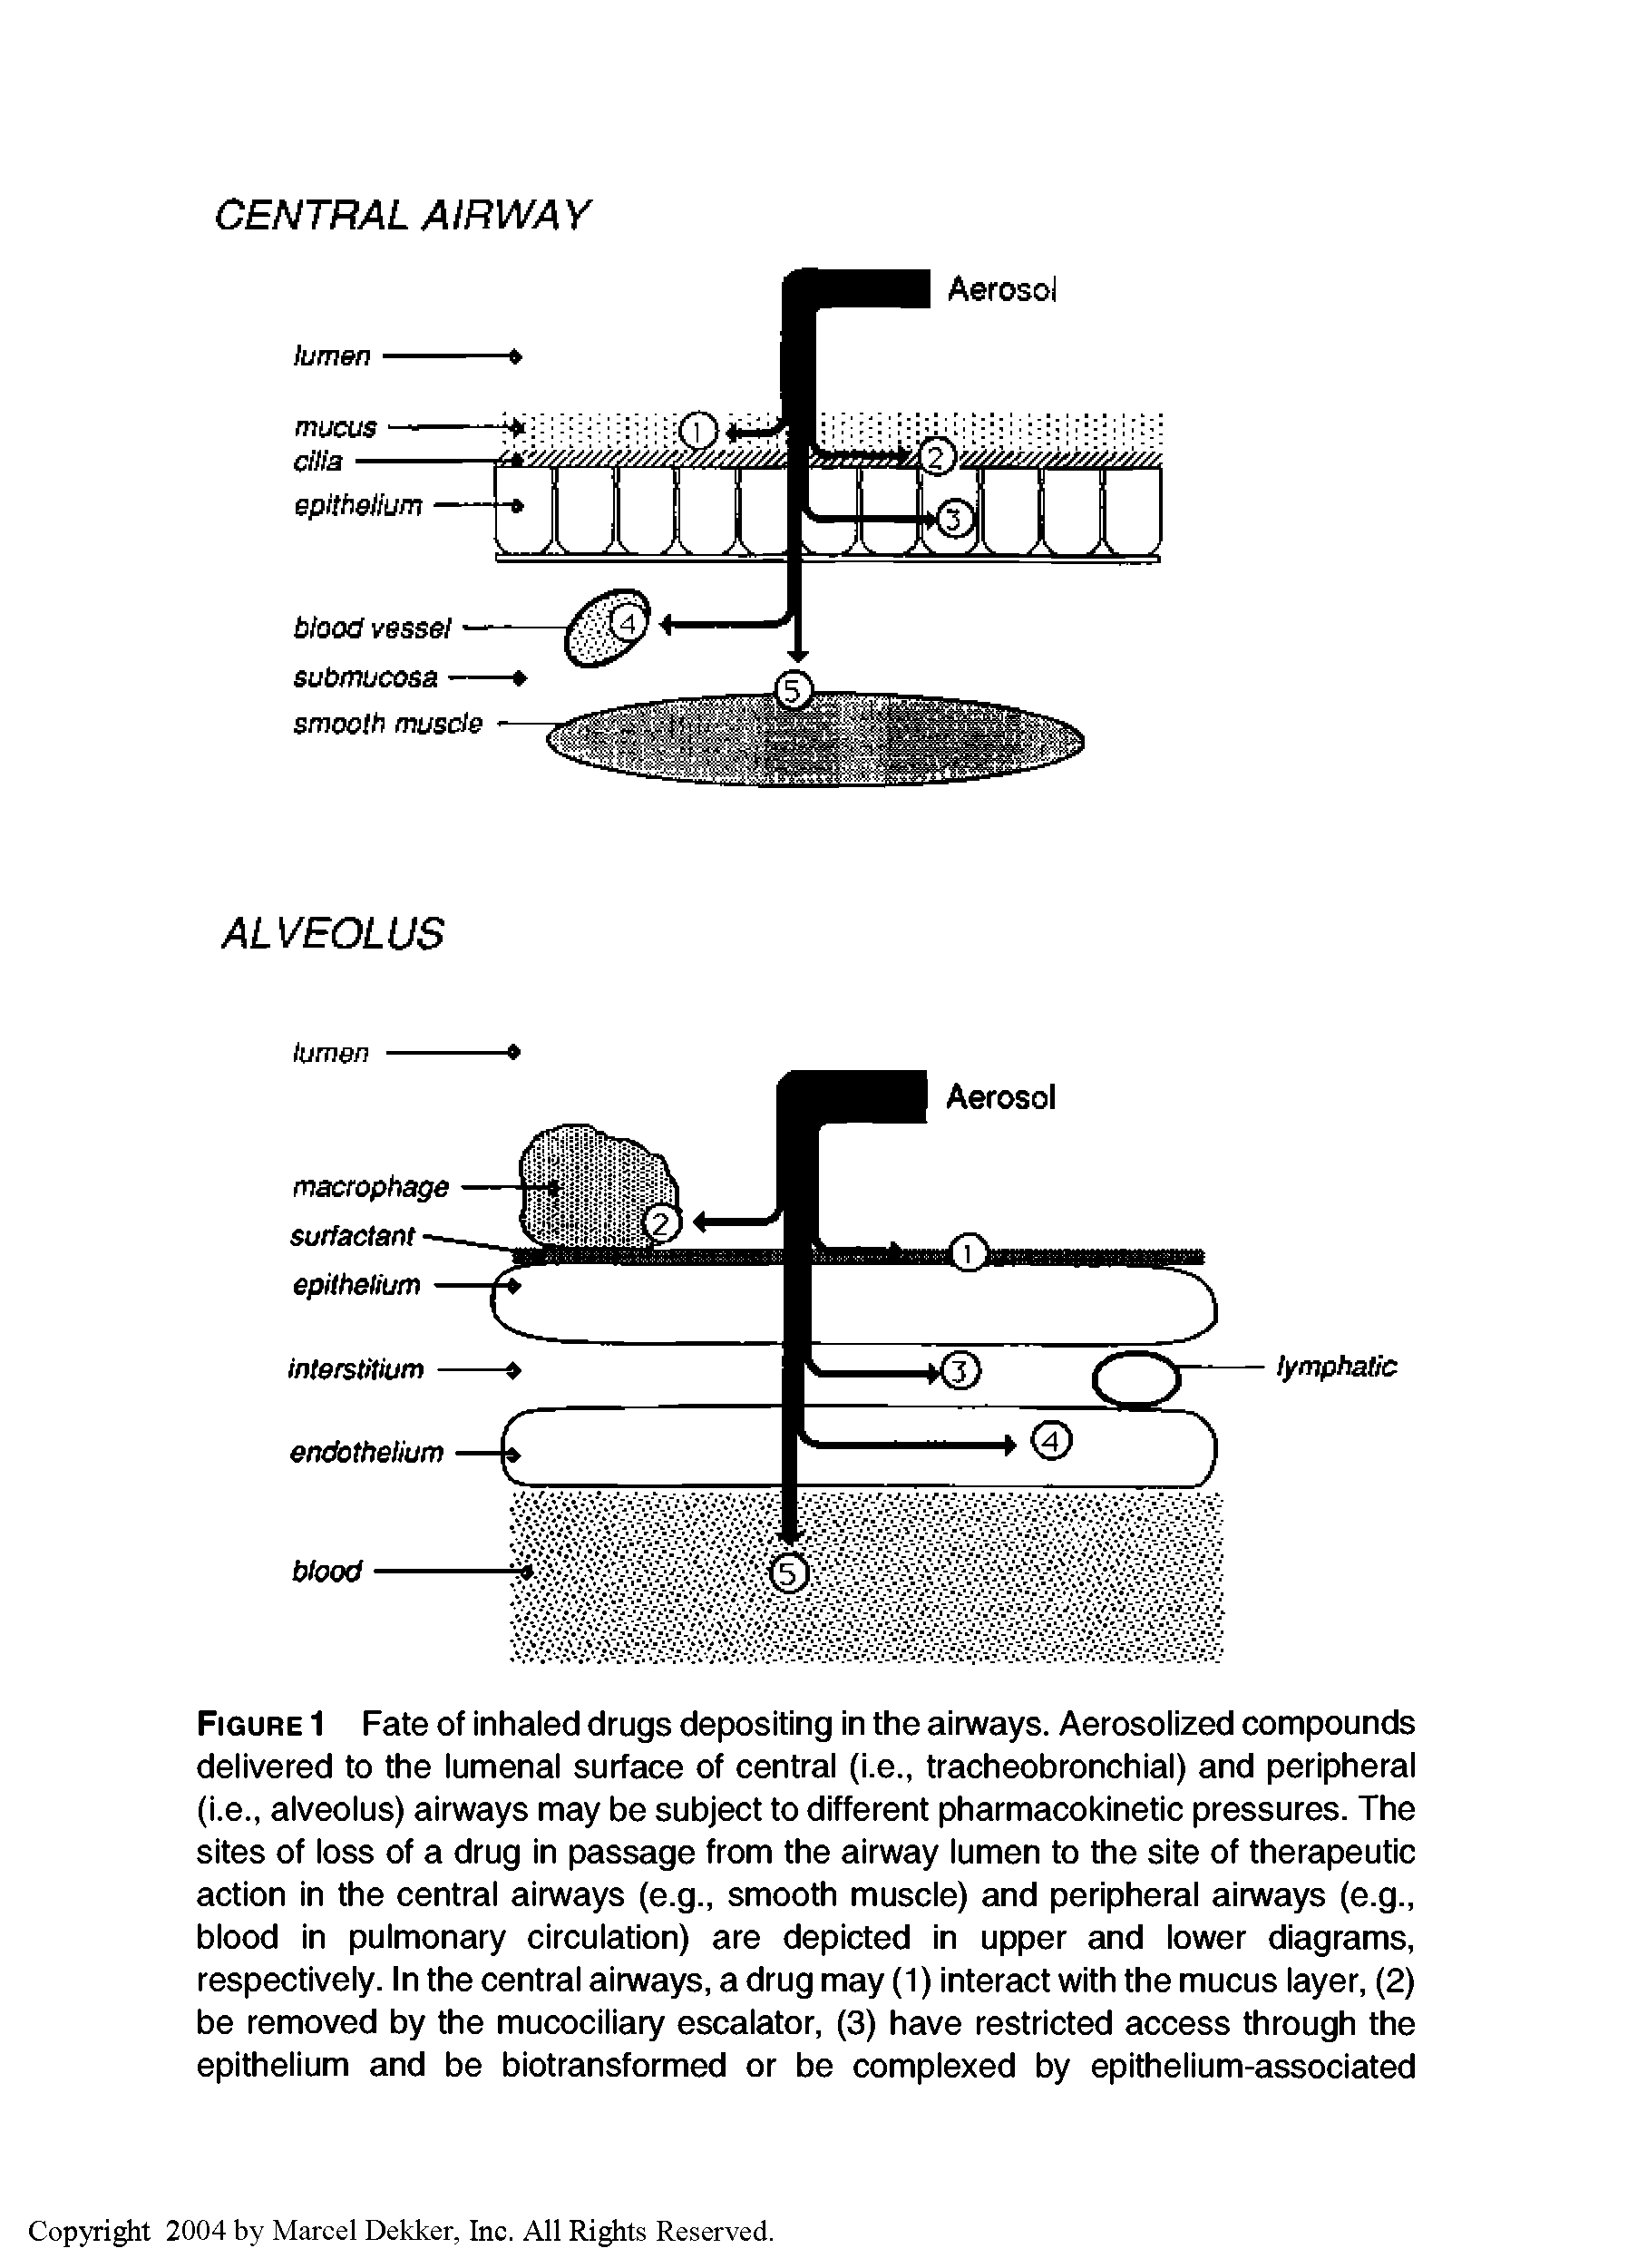 Figure 1 Fate of inhaled drugs depositing in the airways. Aerosolized compounds delivered to the lumenal surface of central (i.e., tracheobronchial) and peripheral (i.e., alveolus) airways may be subject to different pharmacokinetic pressures. The sites of loss of a drug in passage from the airway lumen to the site of therapeutic action in the central airways (e.g., smooth muscle) and peripheral airways (e.g., blood in pulmonary circulation) are depicted in upper and lower diagrams, respectively. In the central airways, a drug may (1) interact with the mucus layer, (2) be removed by the mucociliary escalator, (3) have restricted access through the epithelium and be biotransformed or be complexed by epithelium-associated...